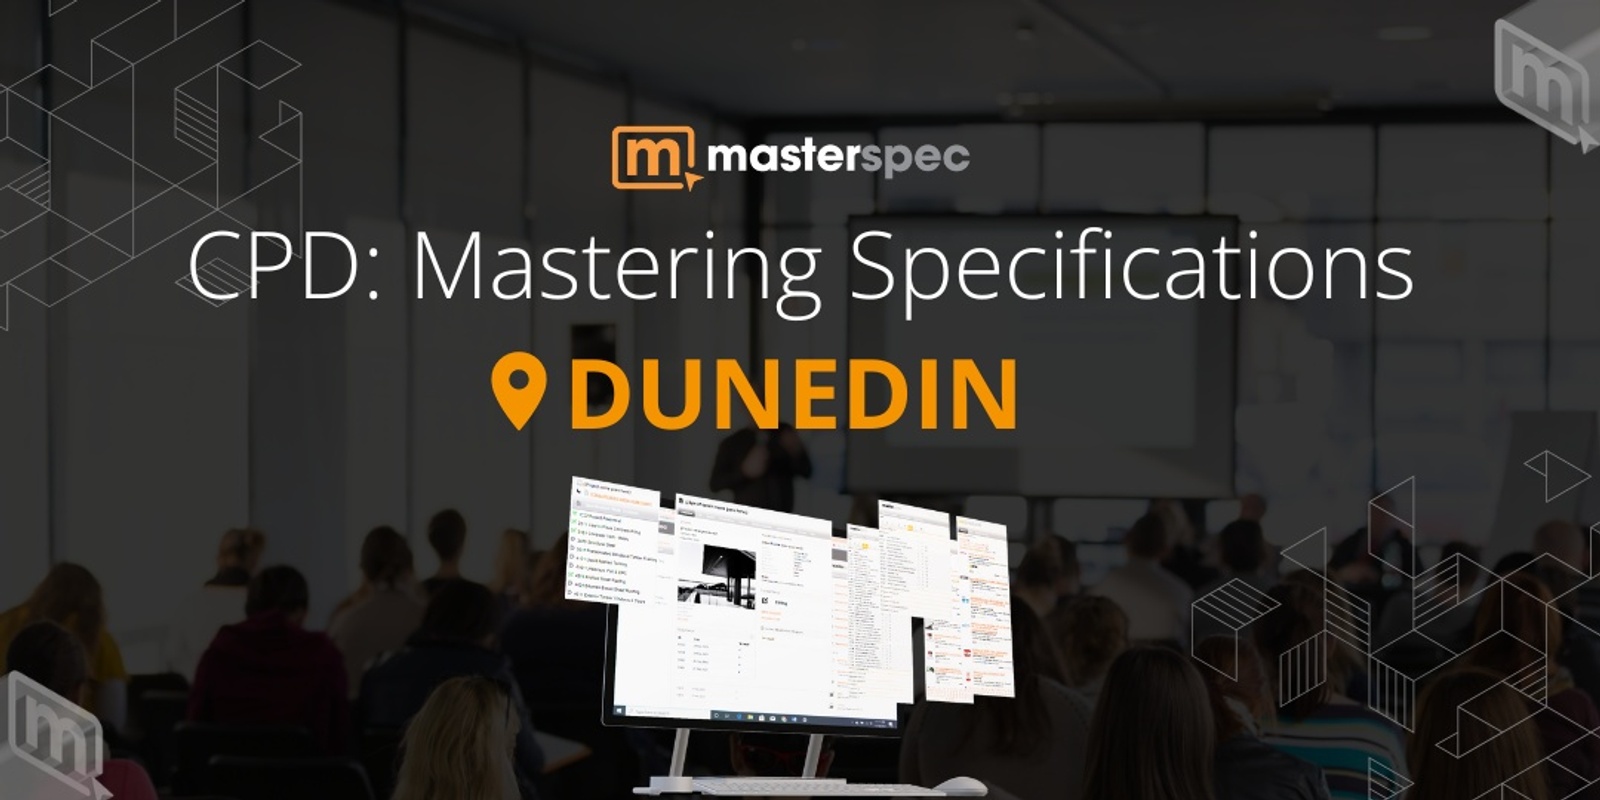 Banner image for CPD: Mastering Masterspec Specifications DUNEDIN| ⭐ 20 CPD Points